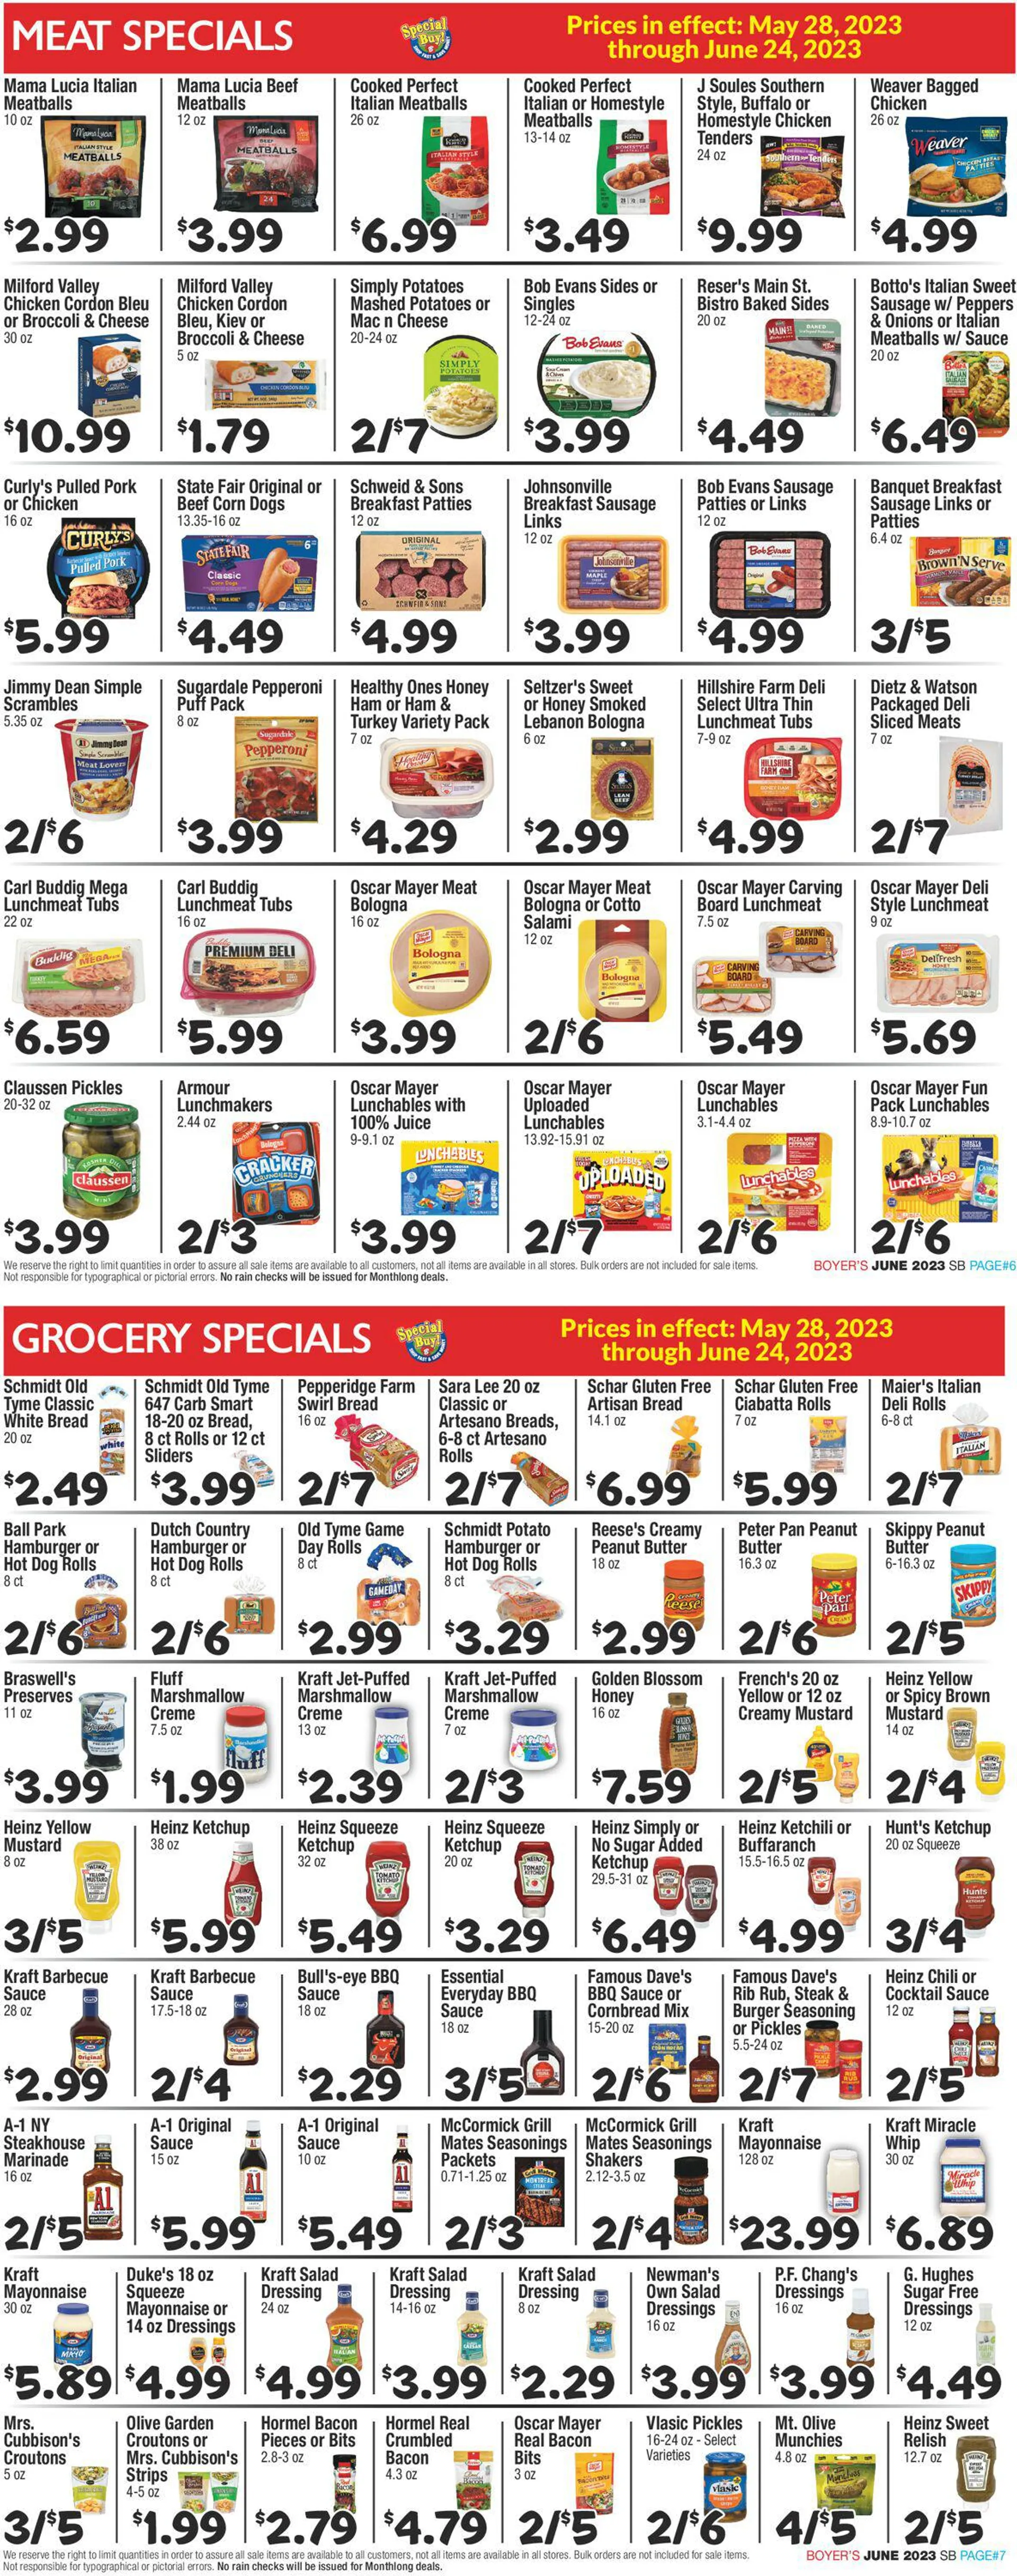 Boyers Food Markets Current weekly ad - 4